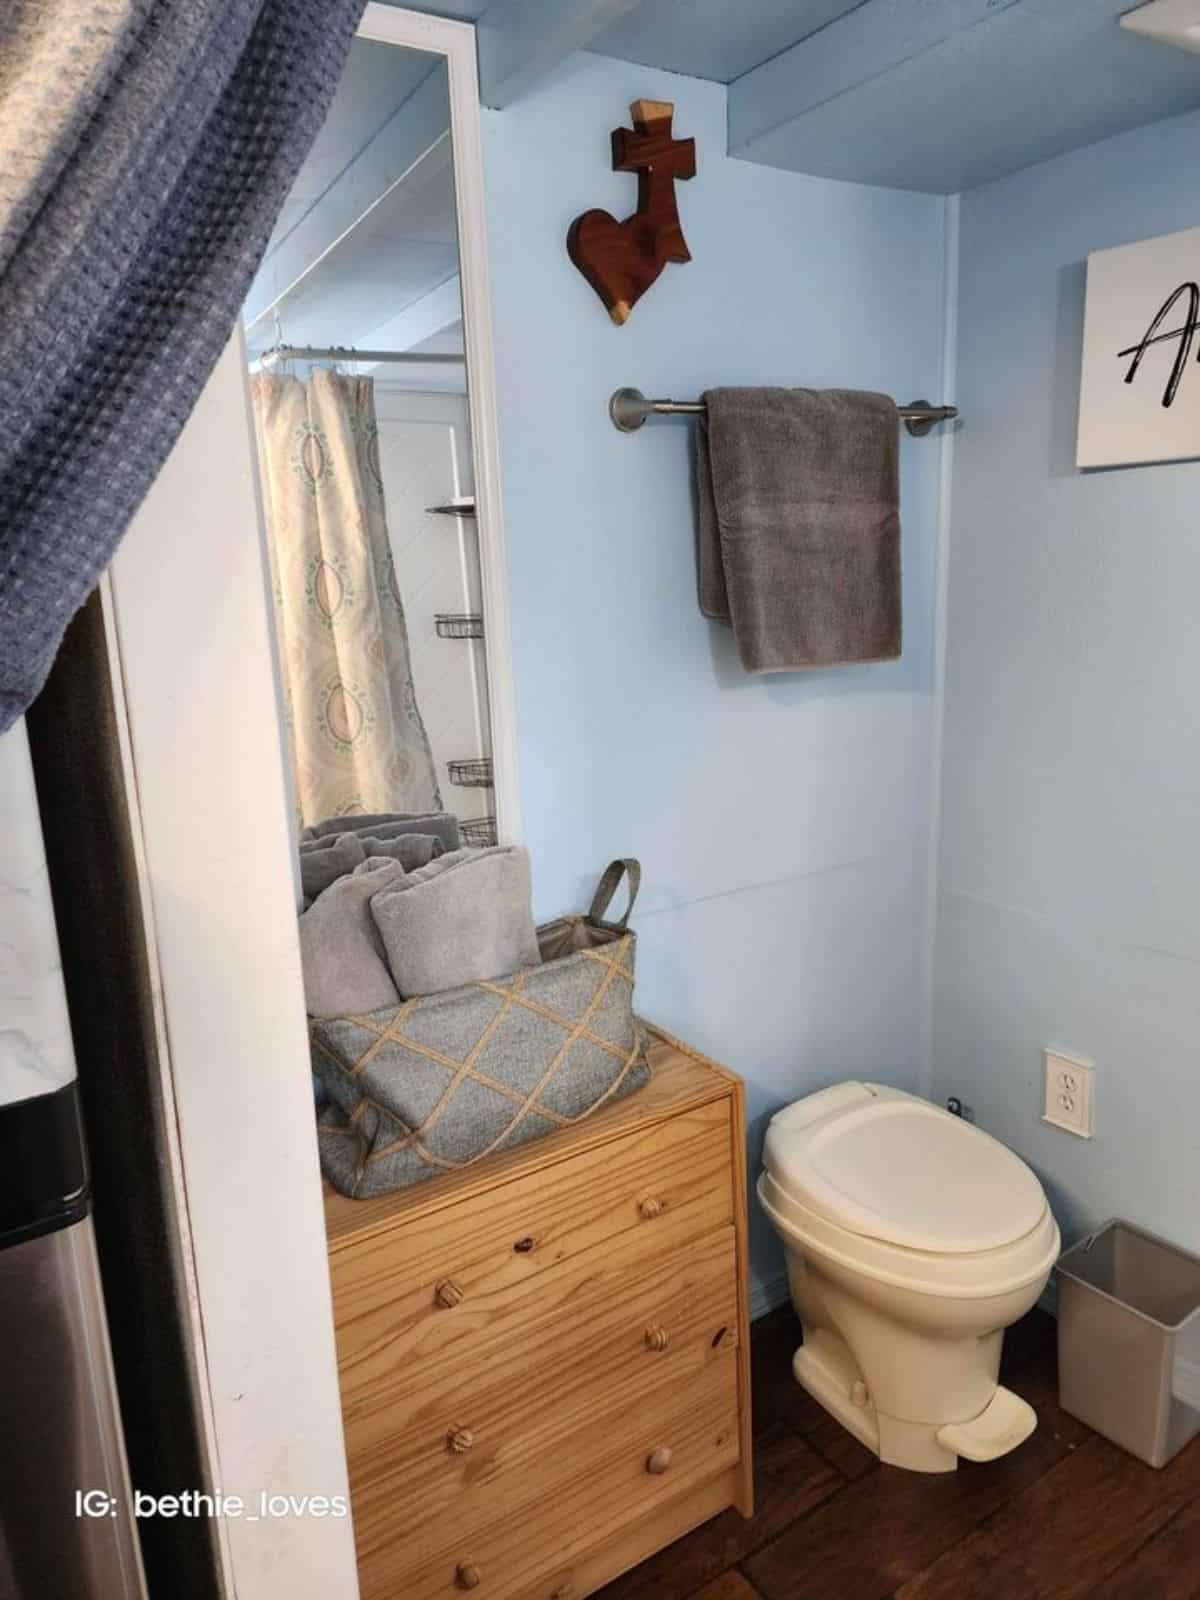 standard toilet and storage cabinets in bathroom of tiny camper home